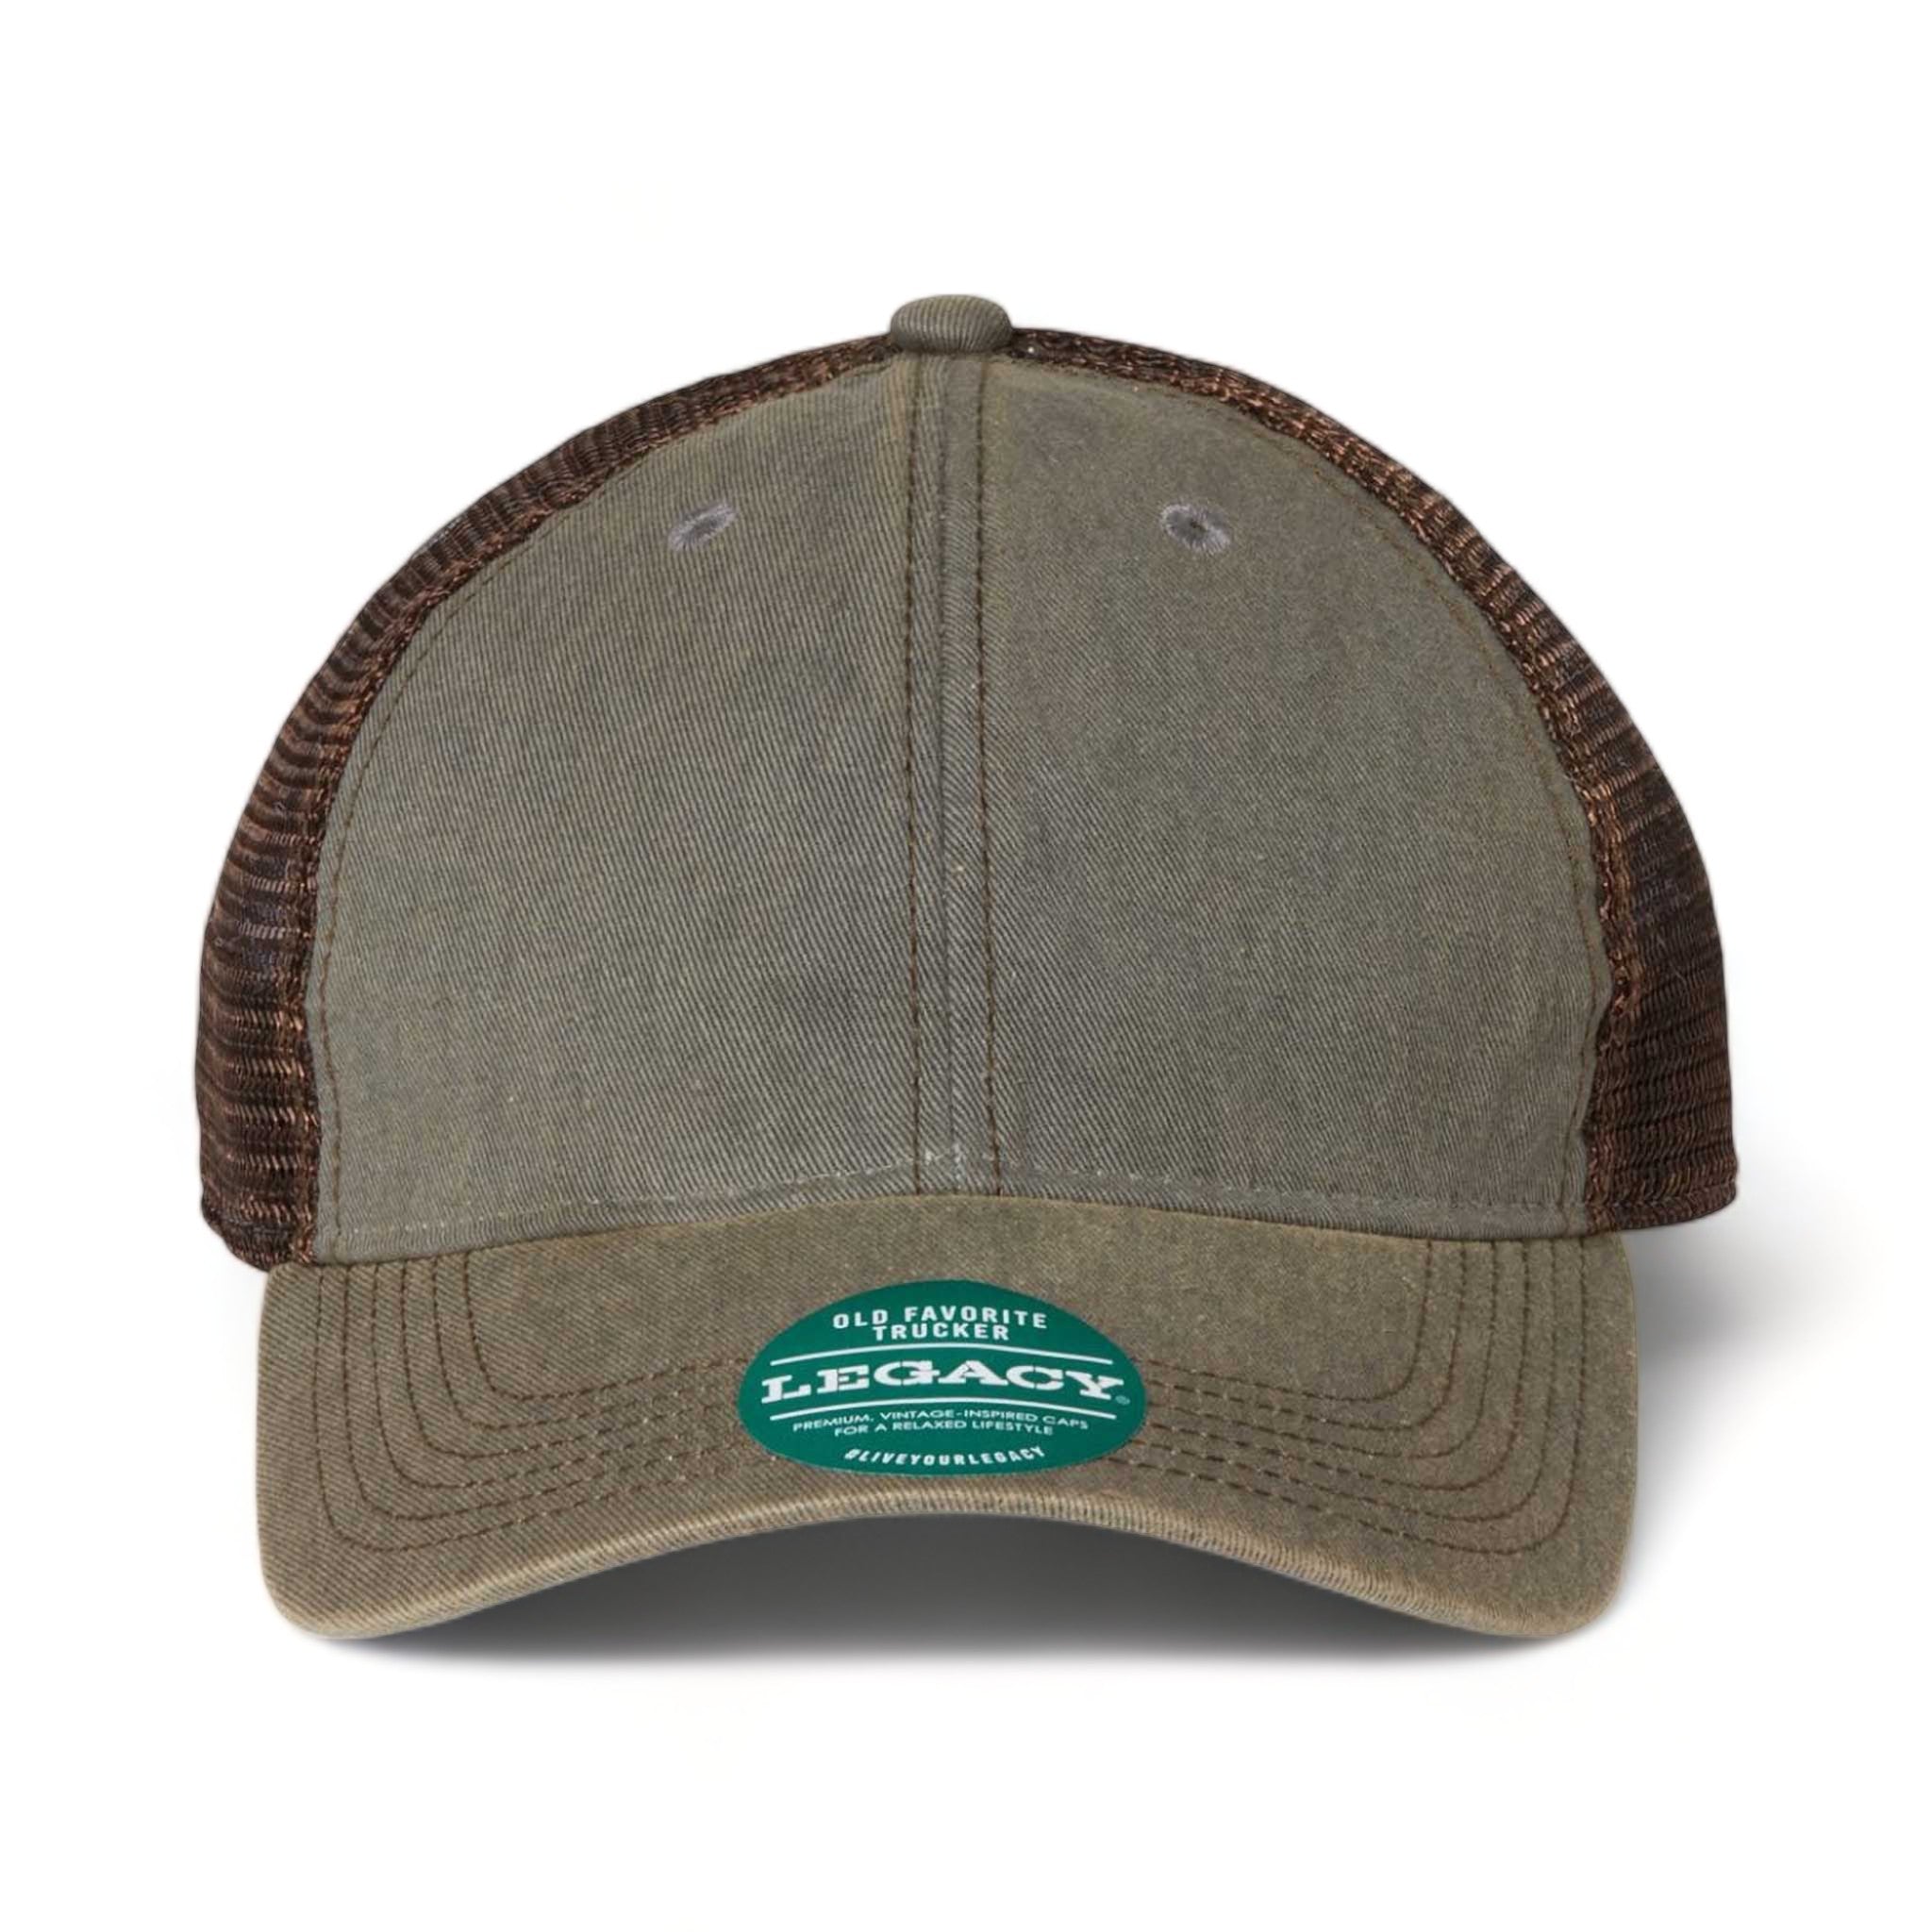 Front view of LEGACY OFA custom hat in grey and brown